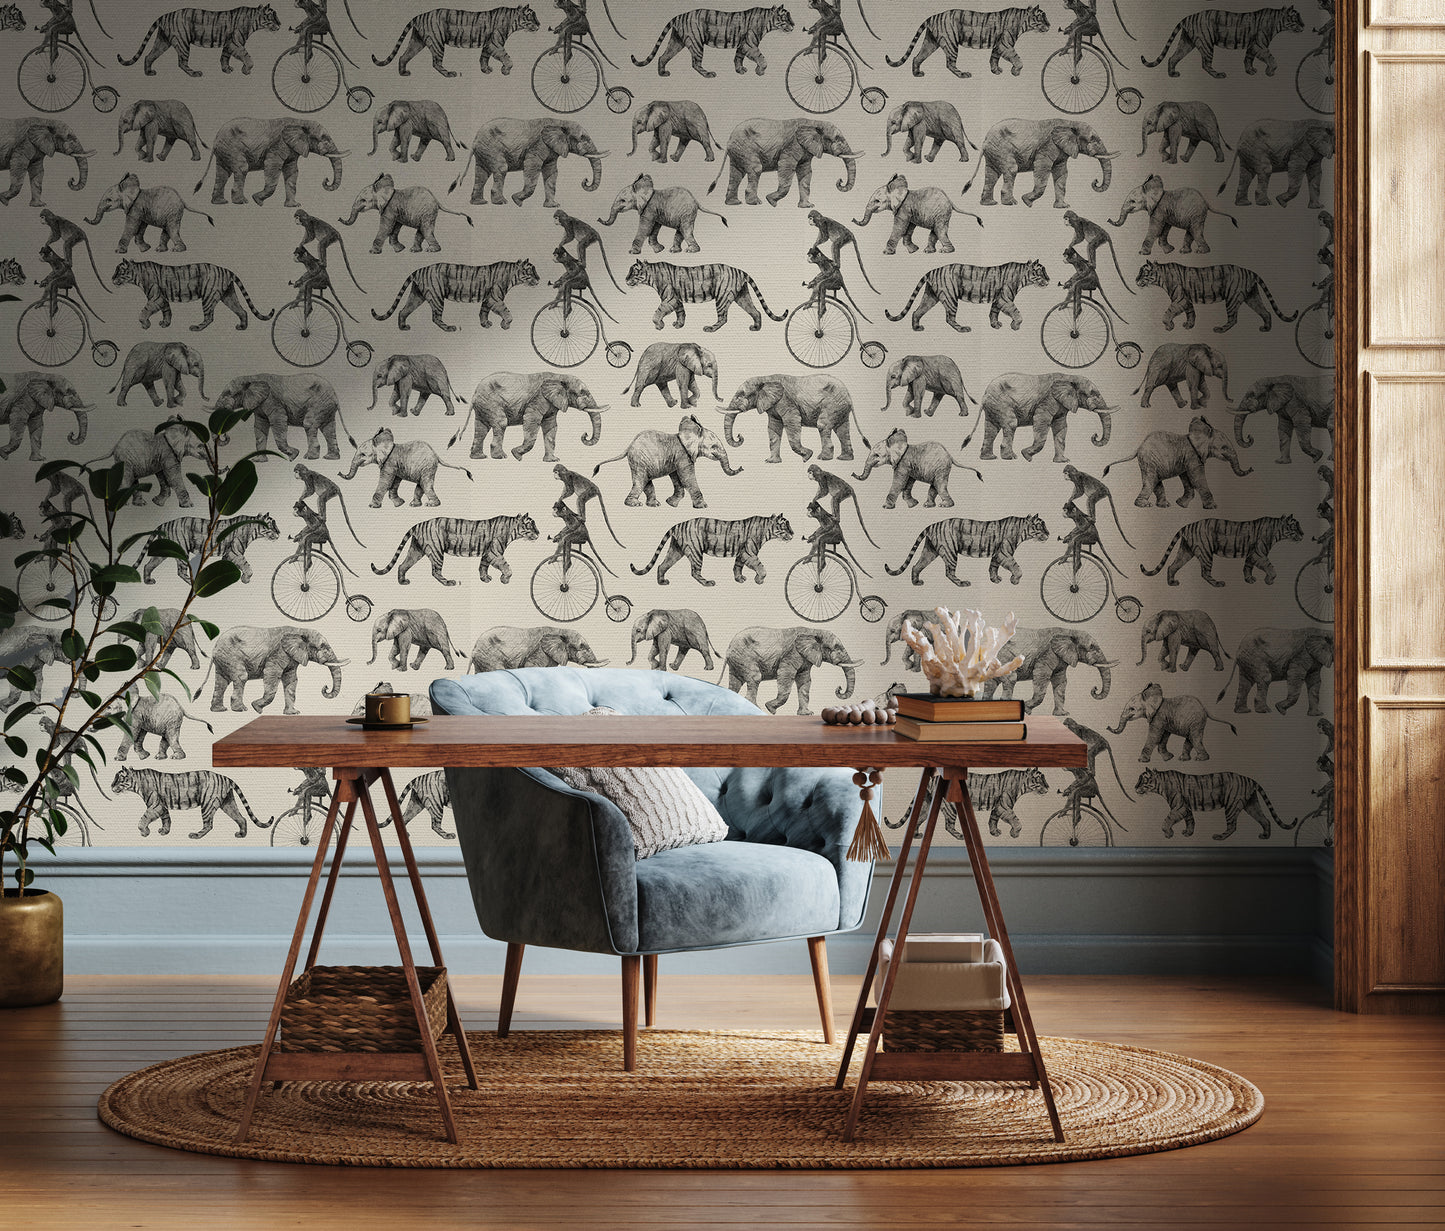 Life Is A Circus Removable Peel And Stick Wallpaper